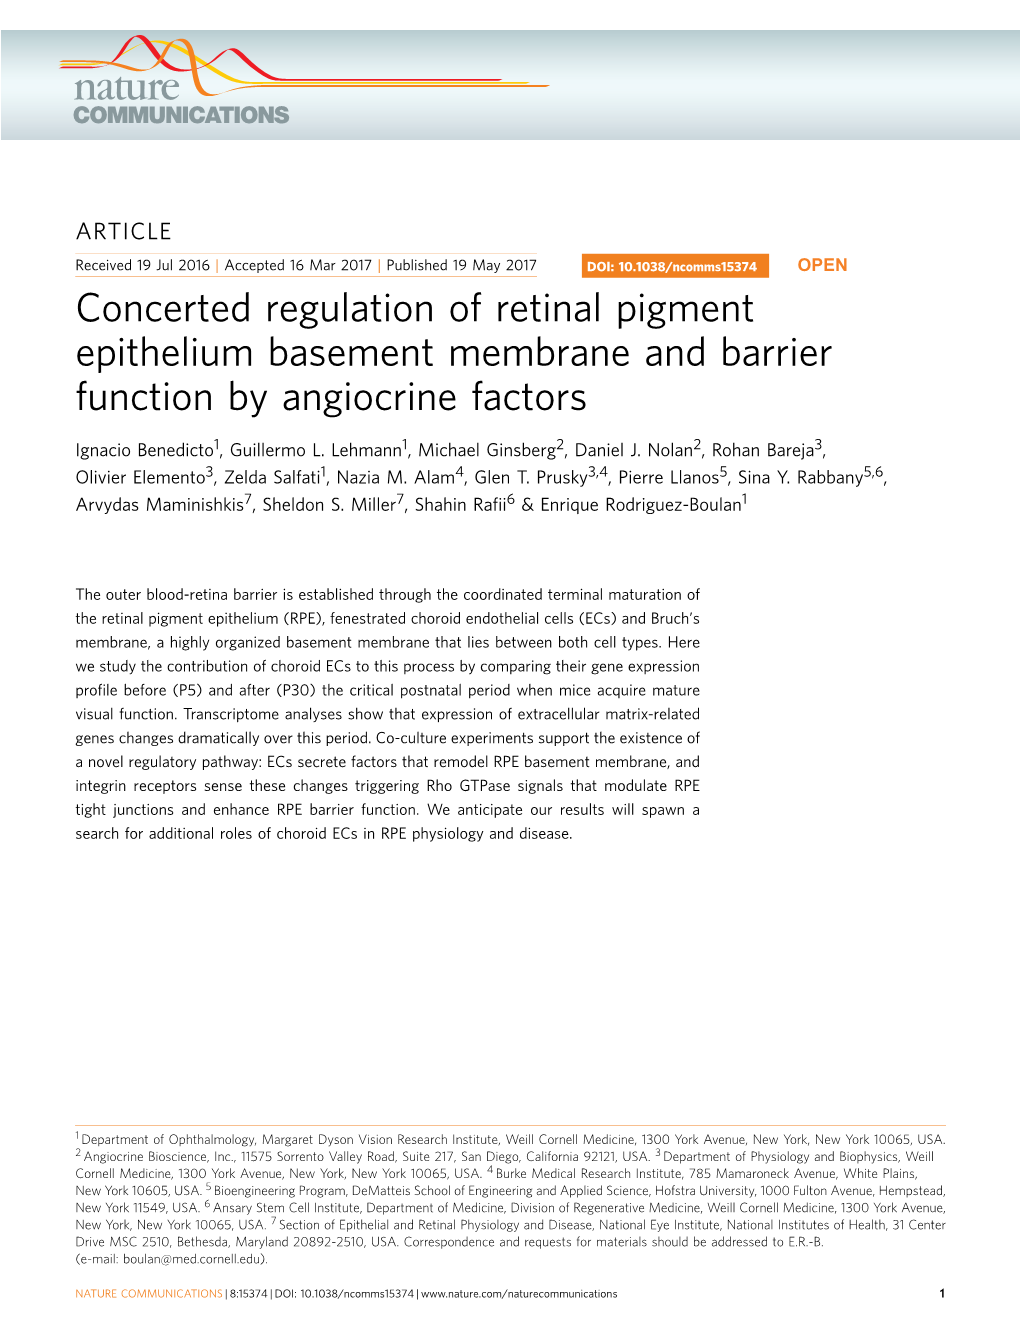 Concerted Regulation of Retinal Pigment Epithelium Basement Membrane and Barrier Function by Angiocrine Factors